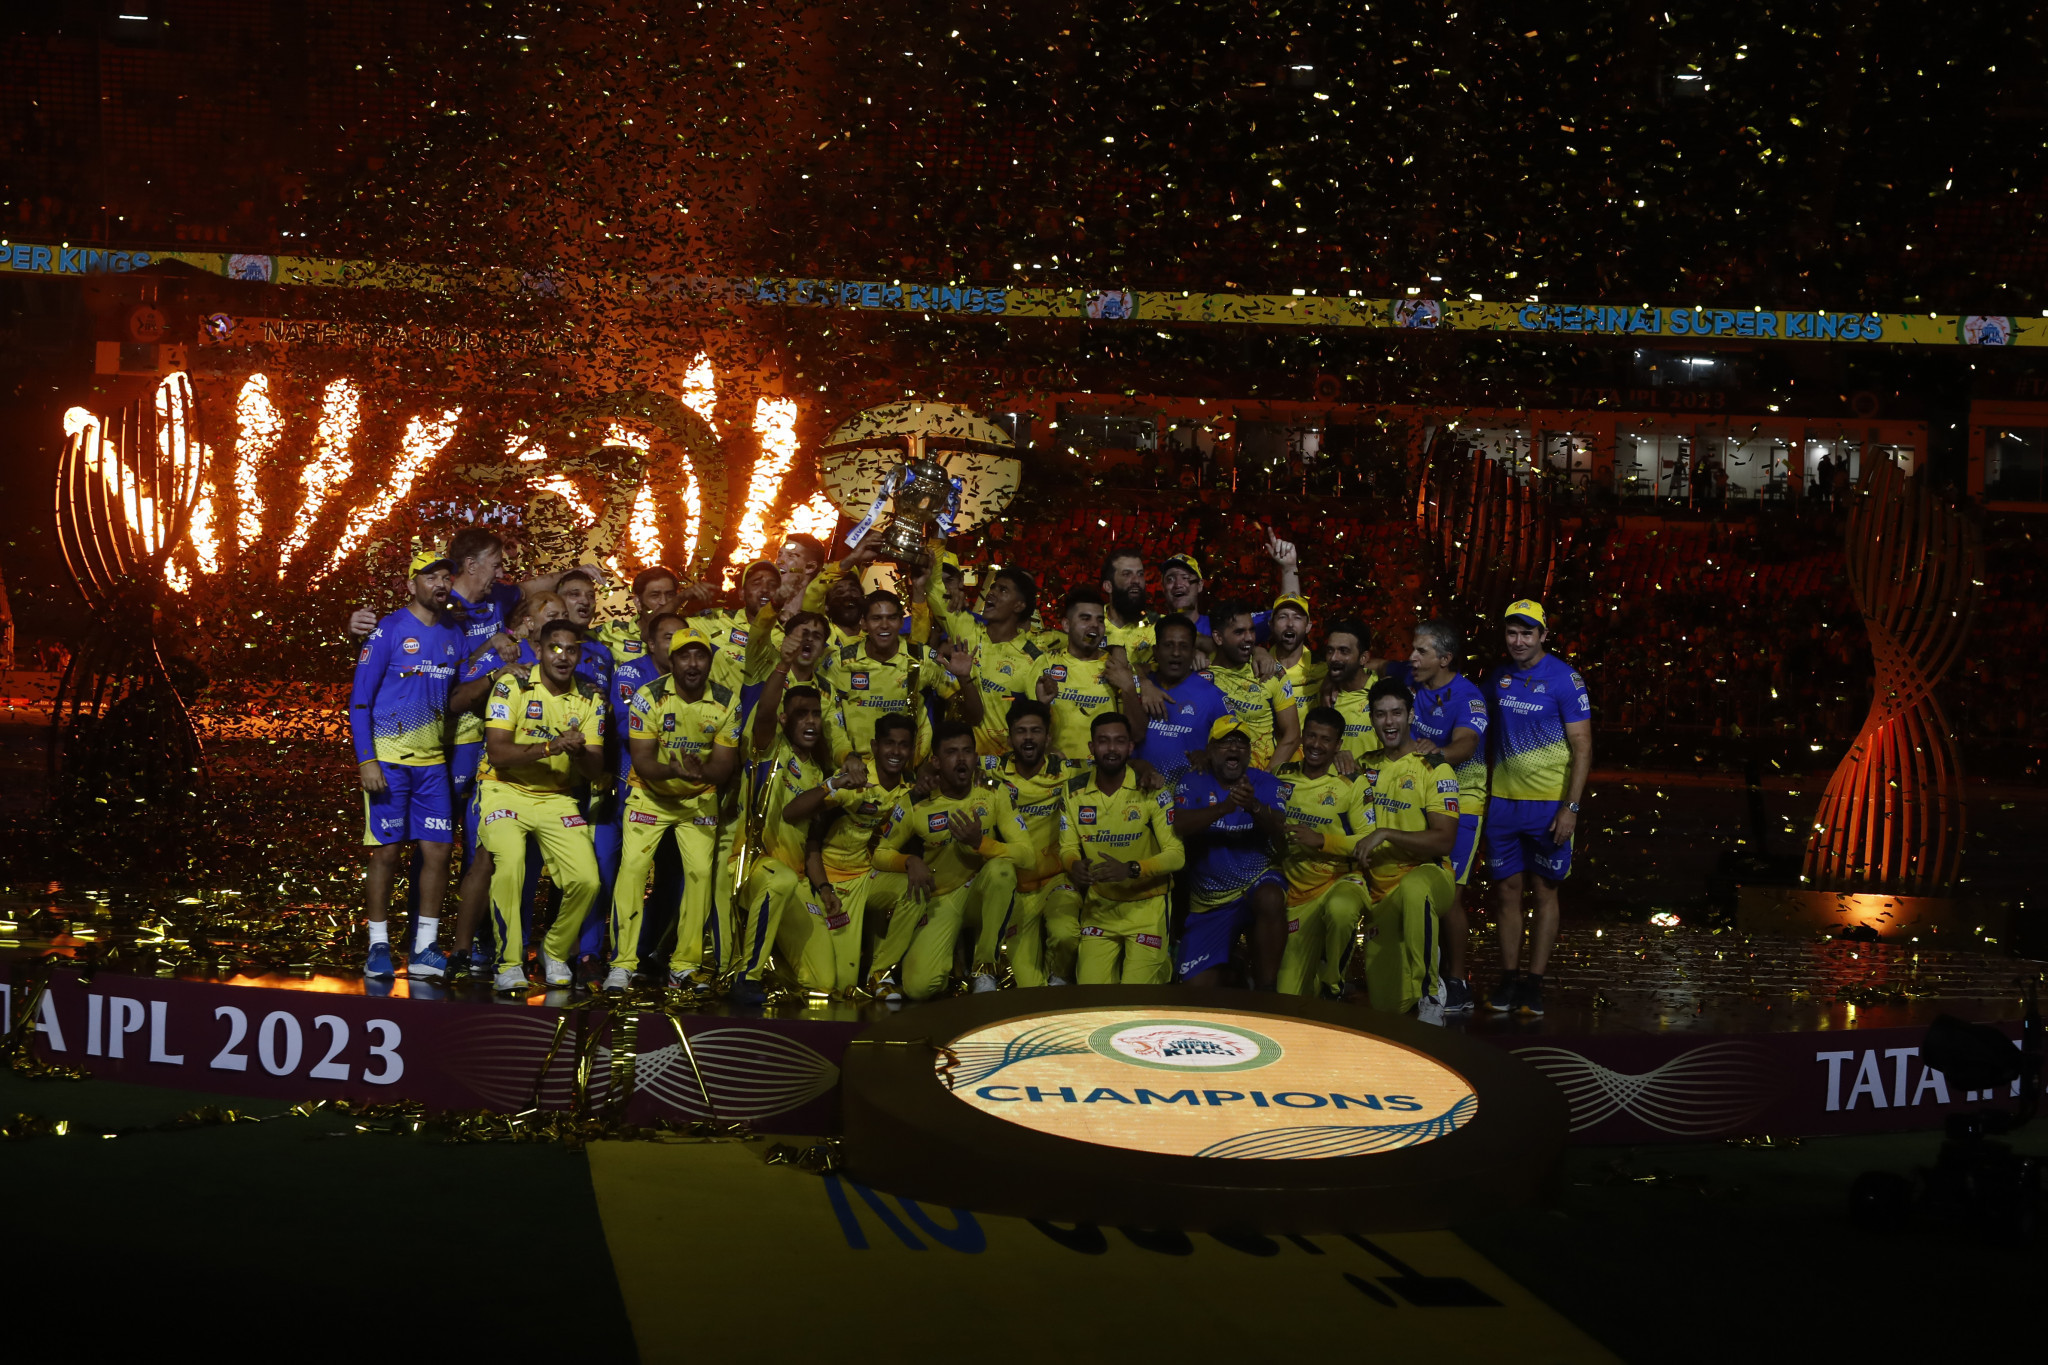 The Indian Premier League has been a successful and lucrative T20 competition since its foundation in 2007 ©Getty Images